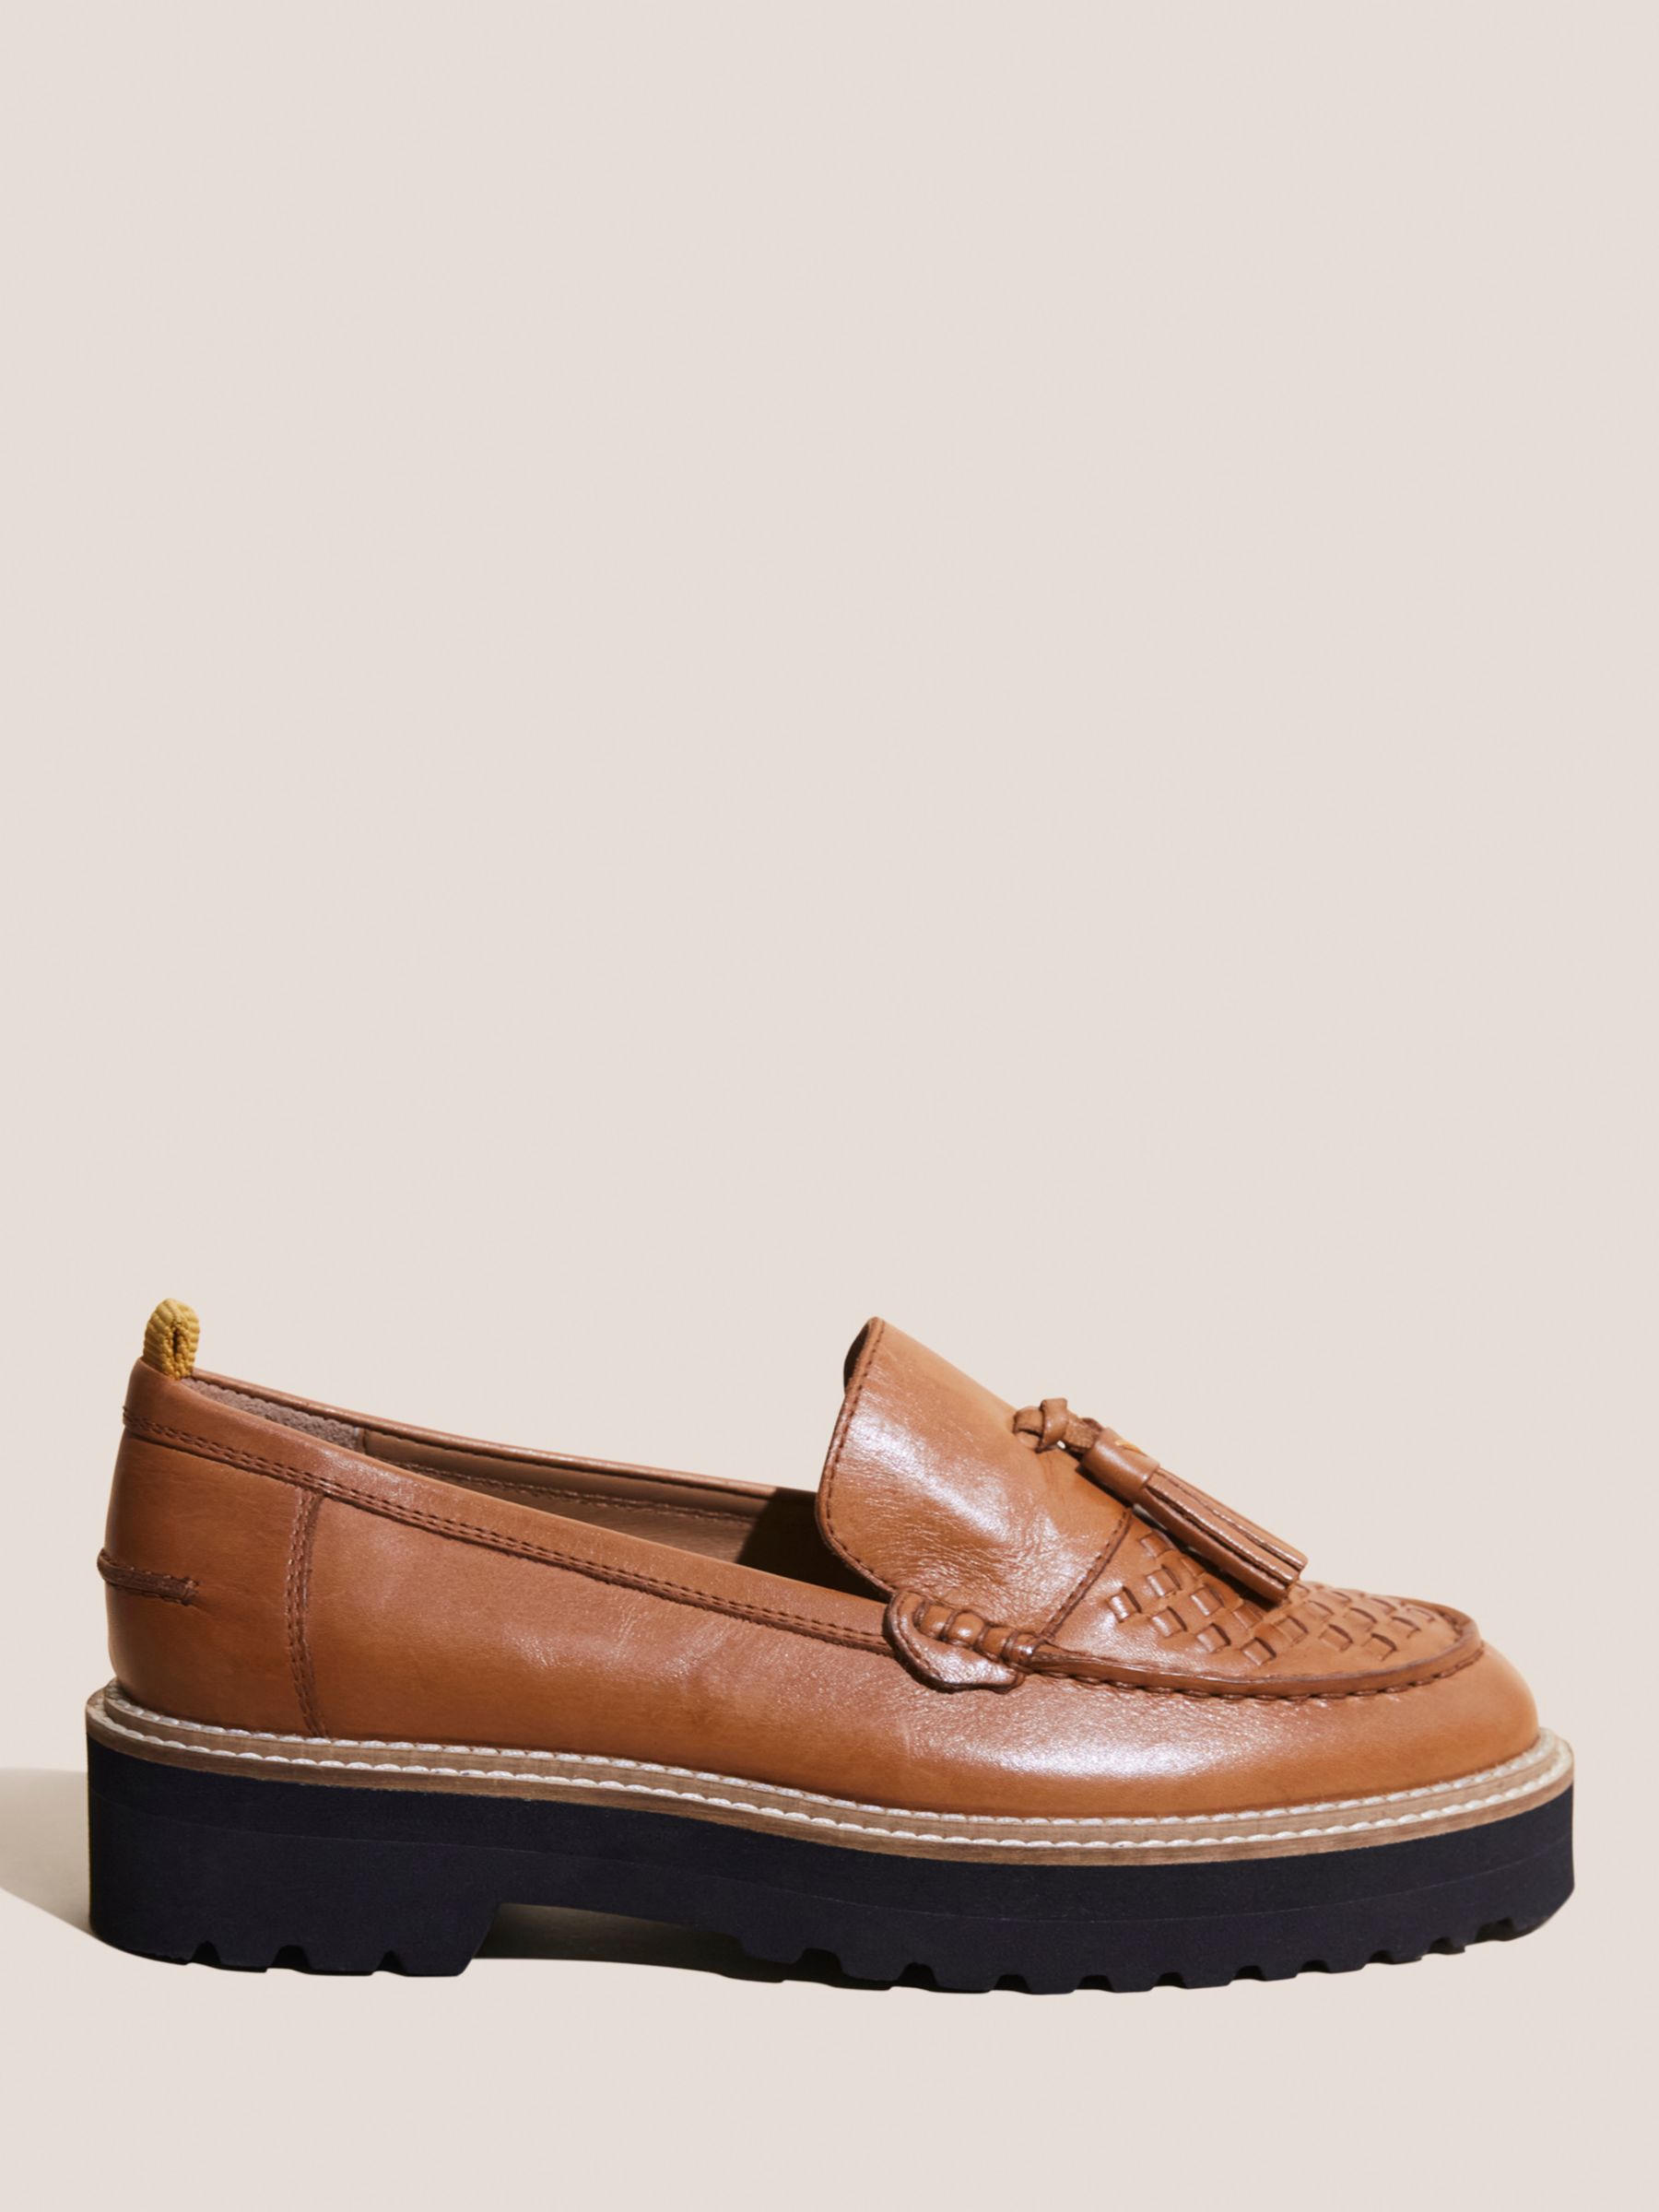 White Stuff Chunky Leather Loafers, Tan